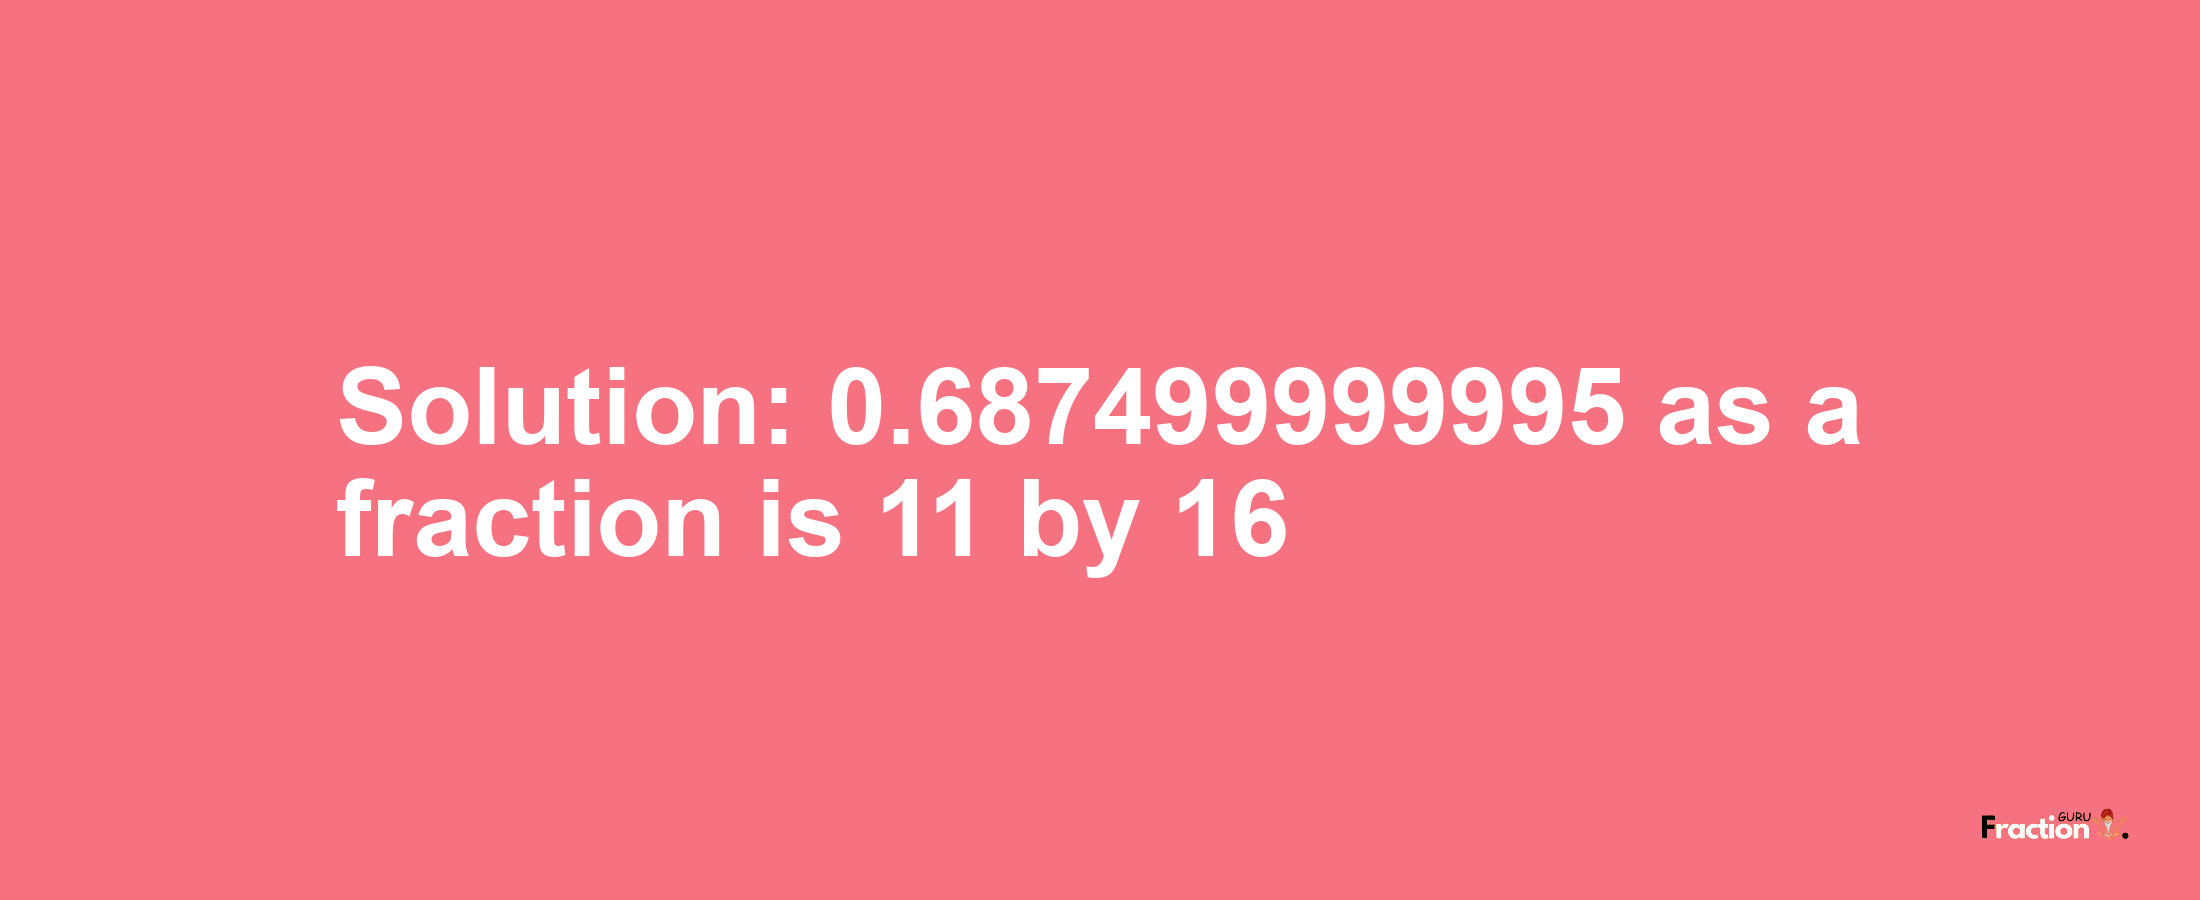 Solution:0.687499999995 as a fraction is 11/16